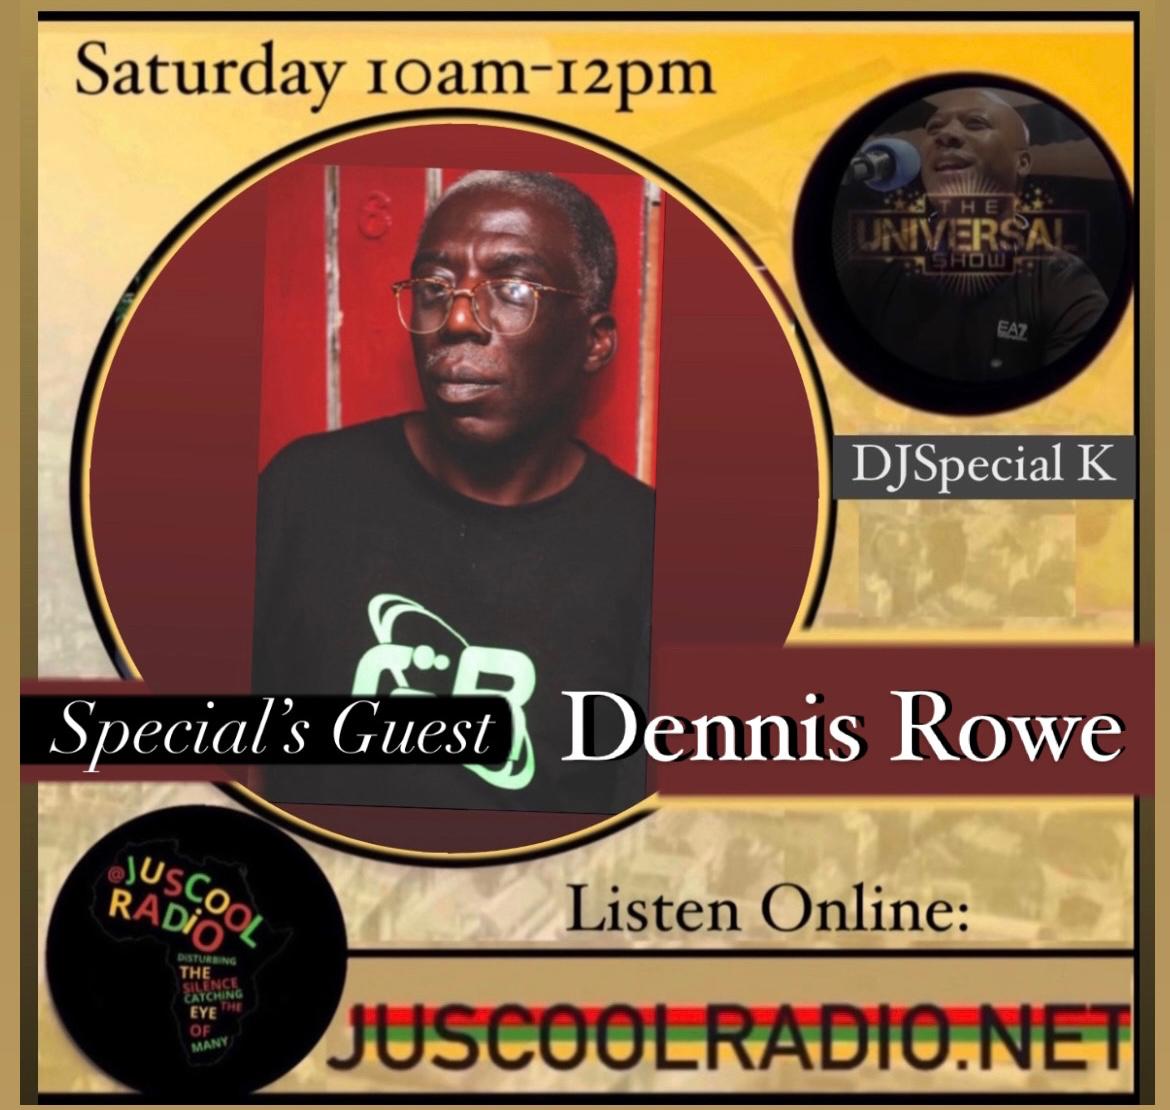 Exclusive interview with Dennis Rowe juscoolradio.net